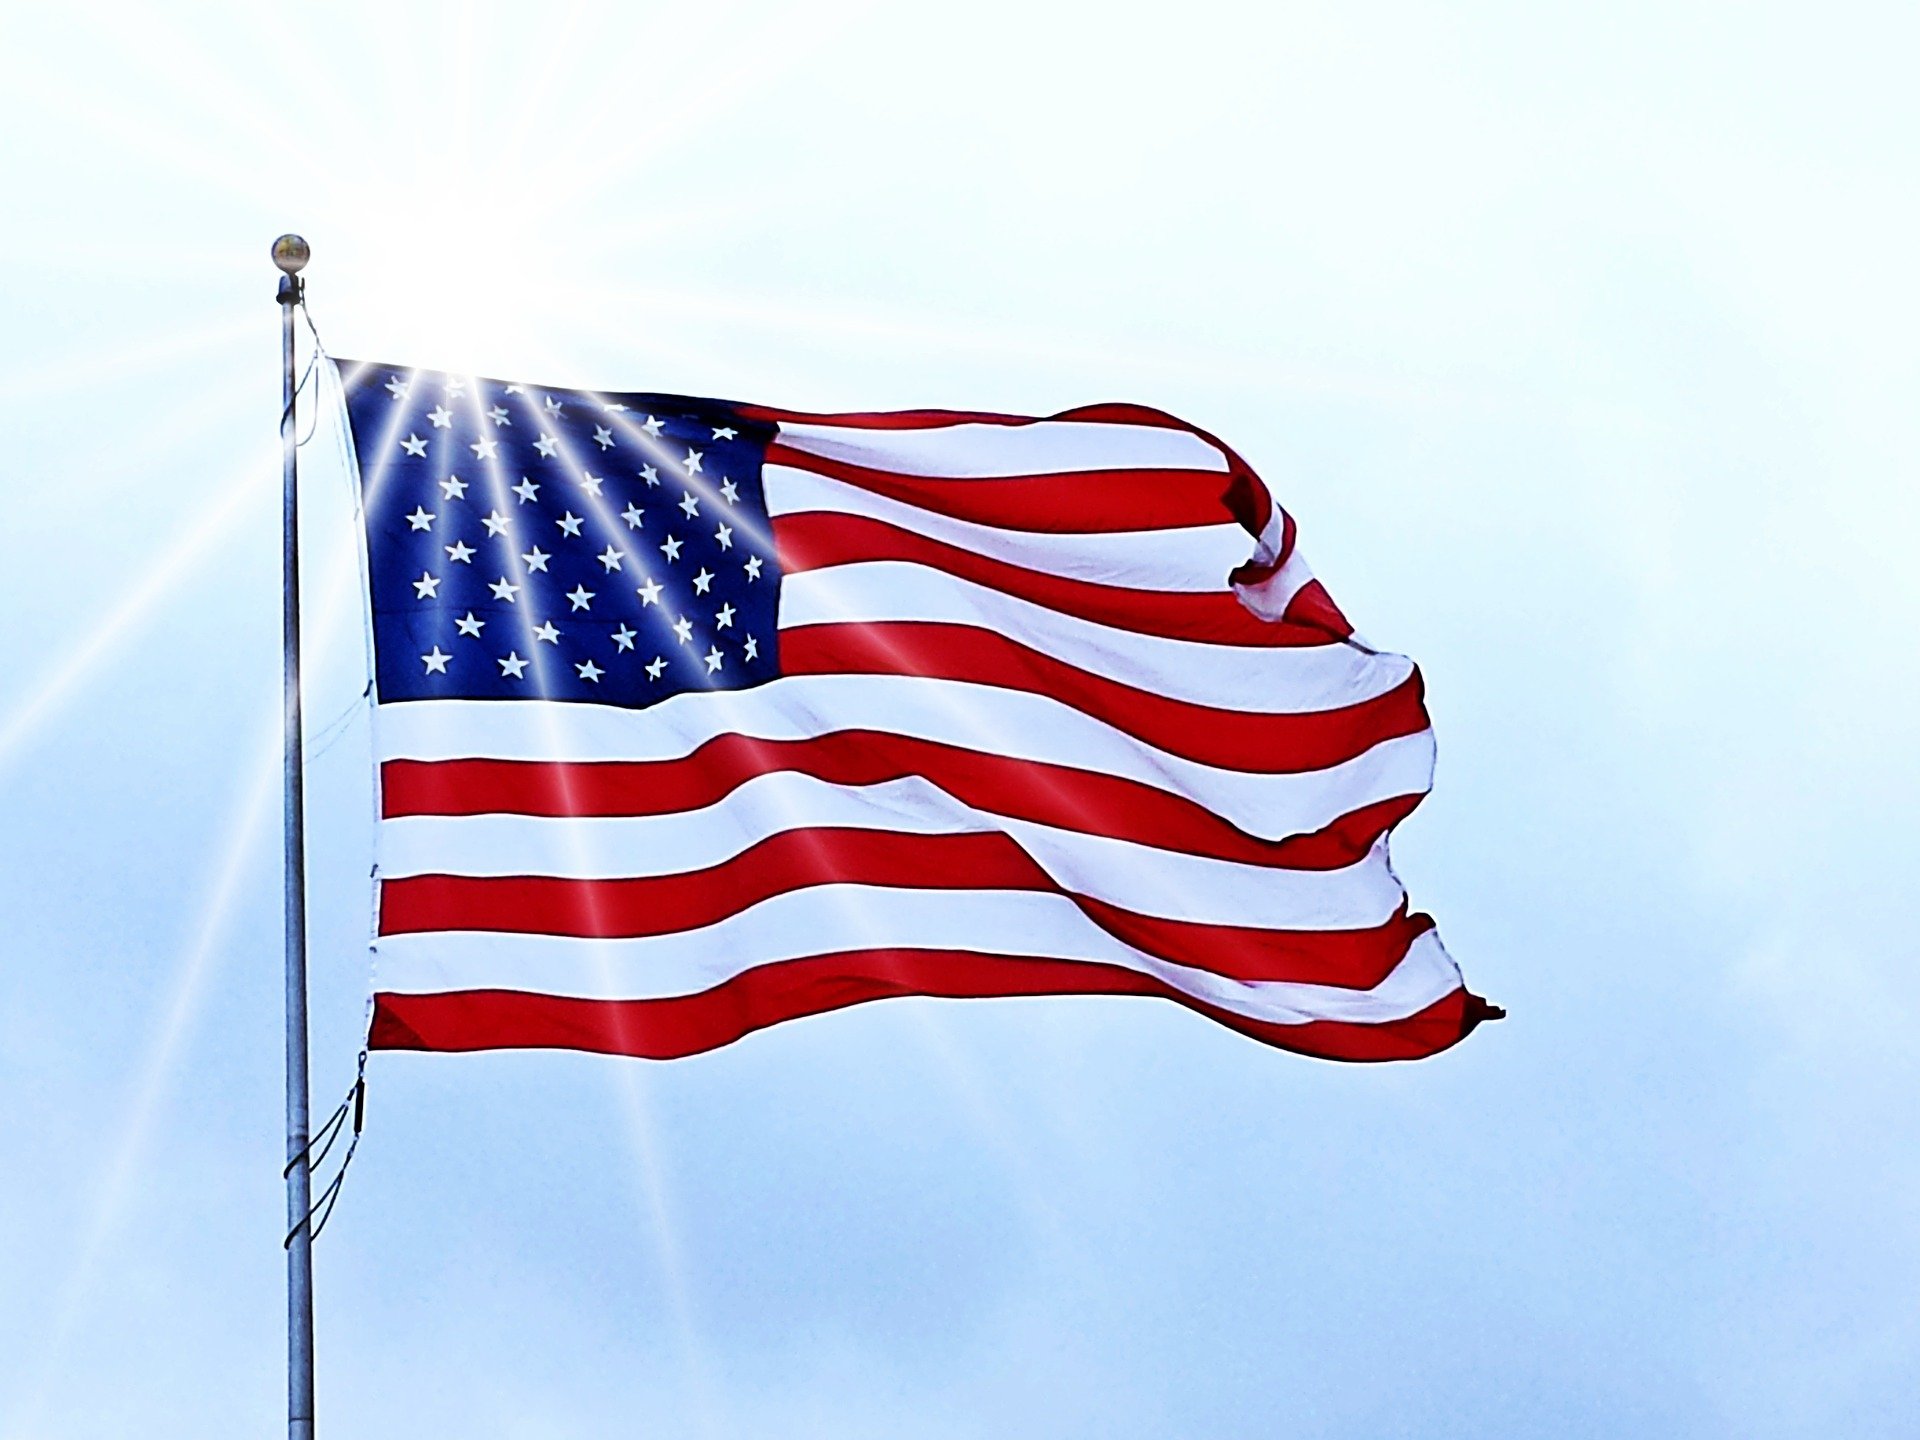 Since its original design in 1777, how many times has the Stars and Stripes been updated with extra stars in the USA flag as more states entered the union? 